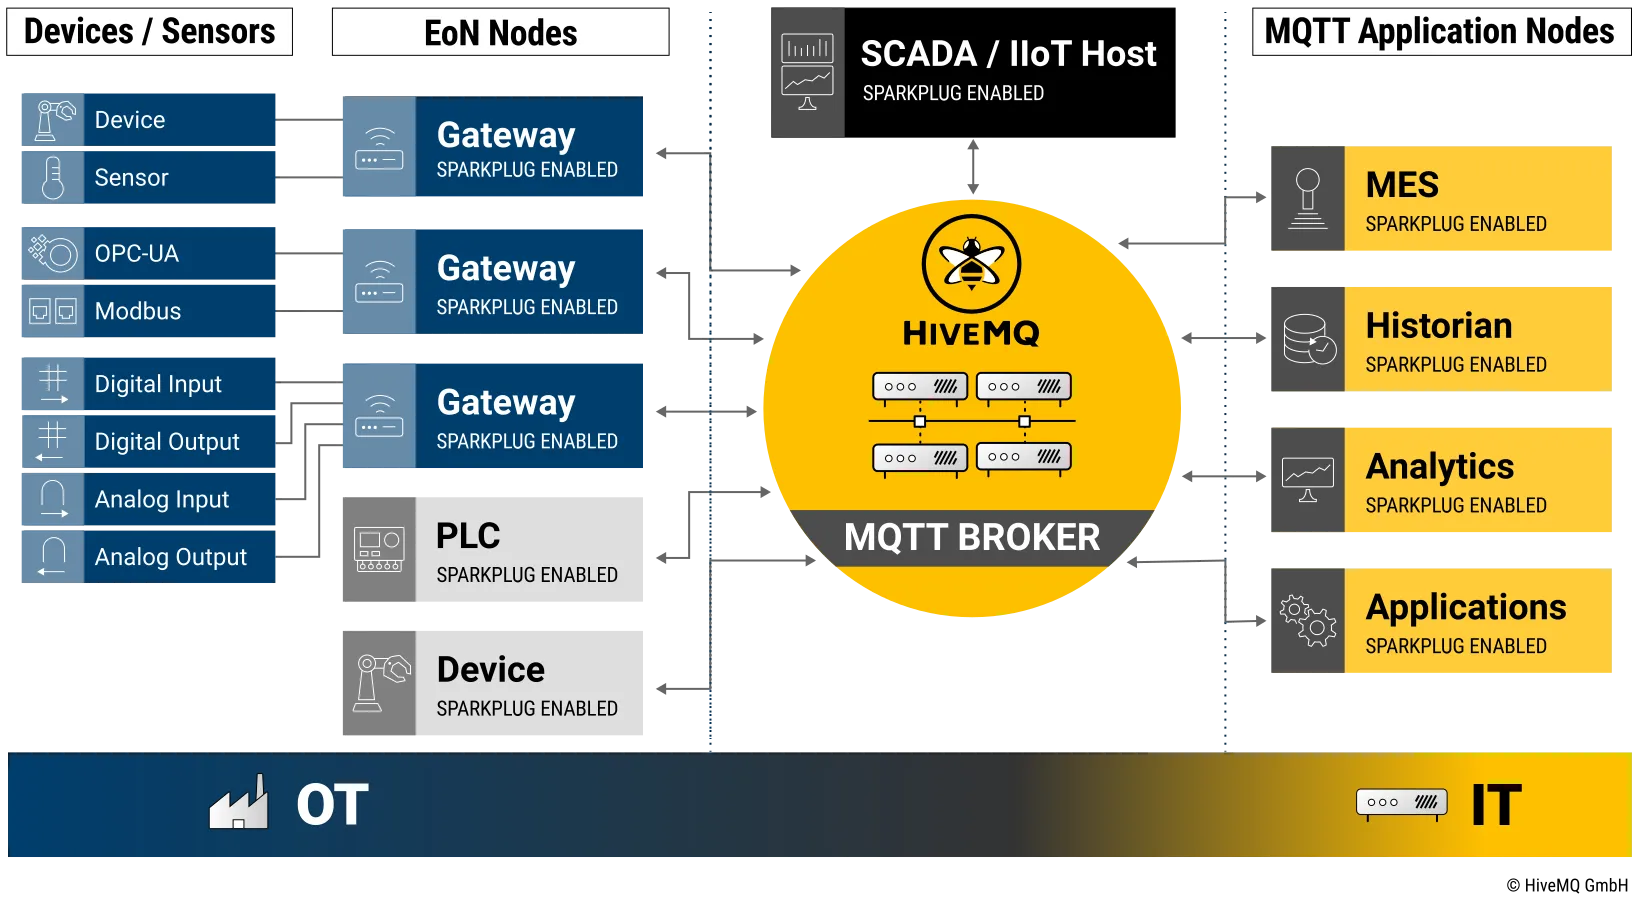 An MQTT Sparkplug-based architecture that supports multiple industrial data producers and data consumers to bridge OT to IT and enable predictive maintenance